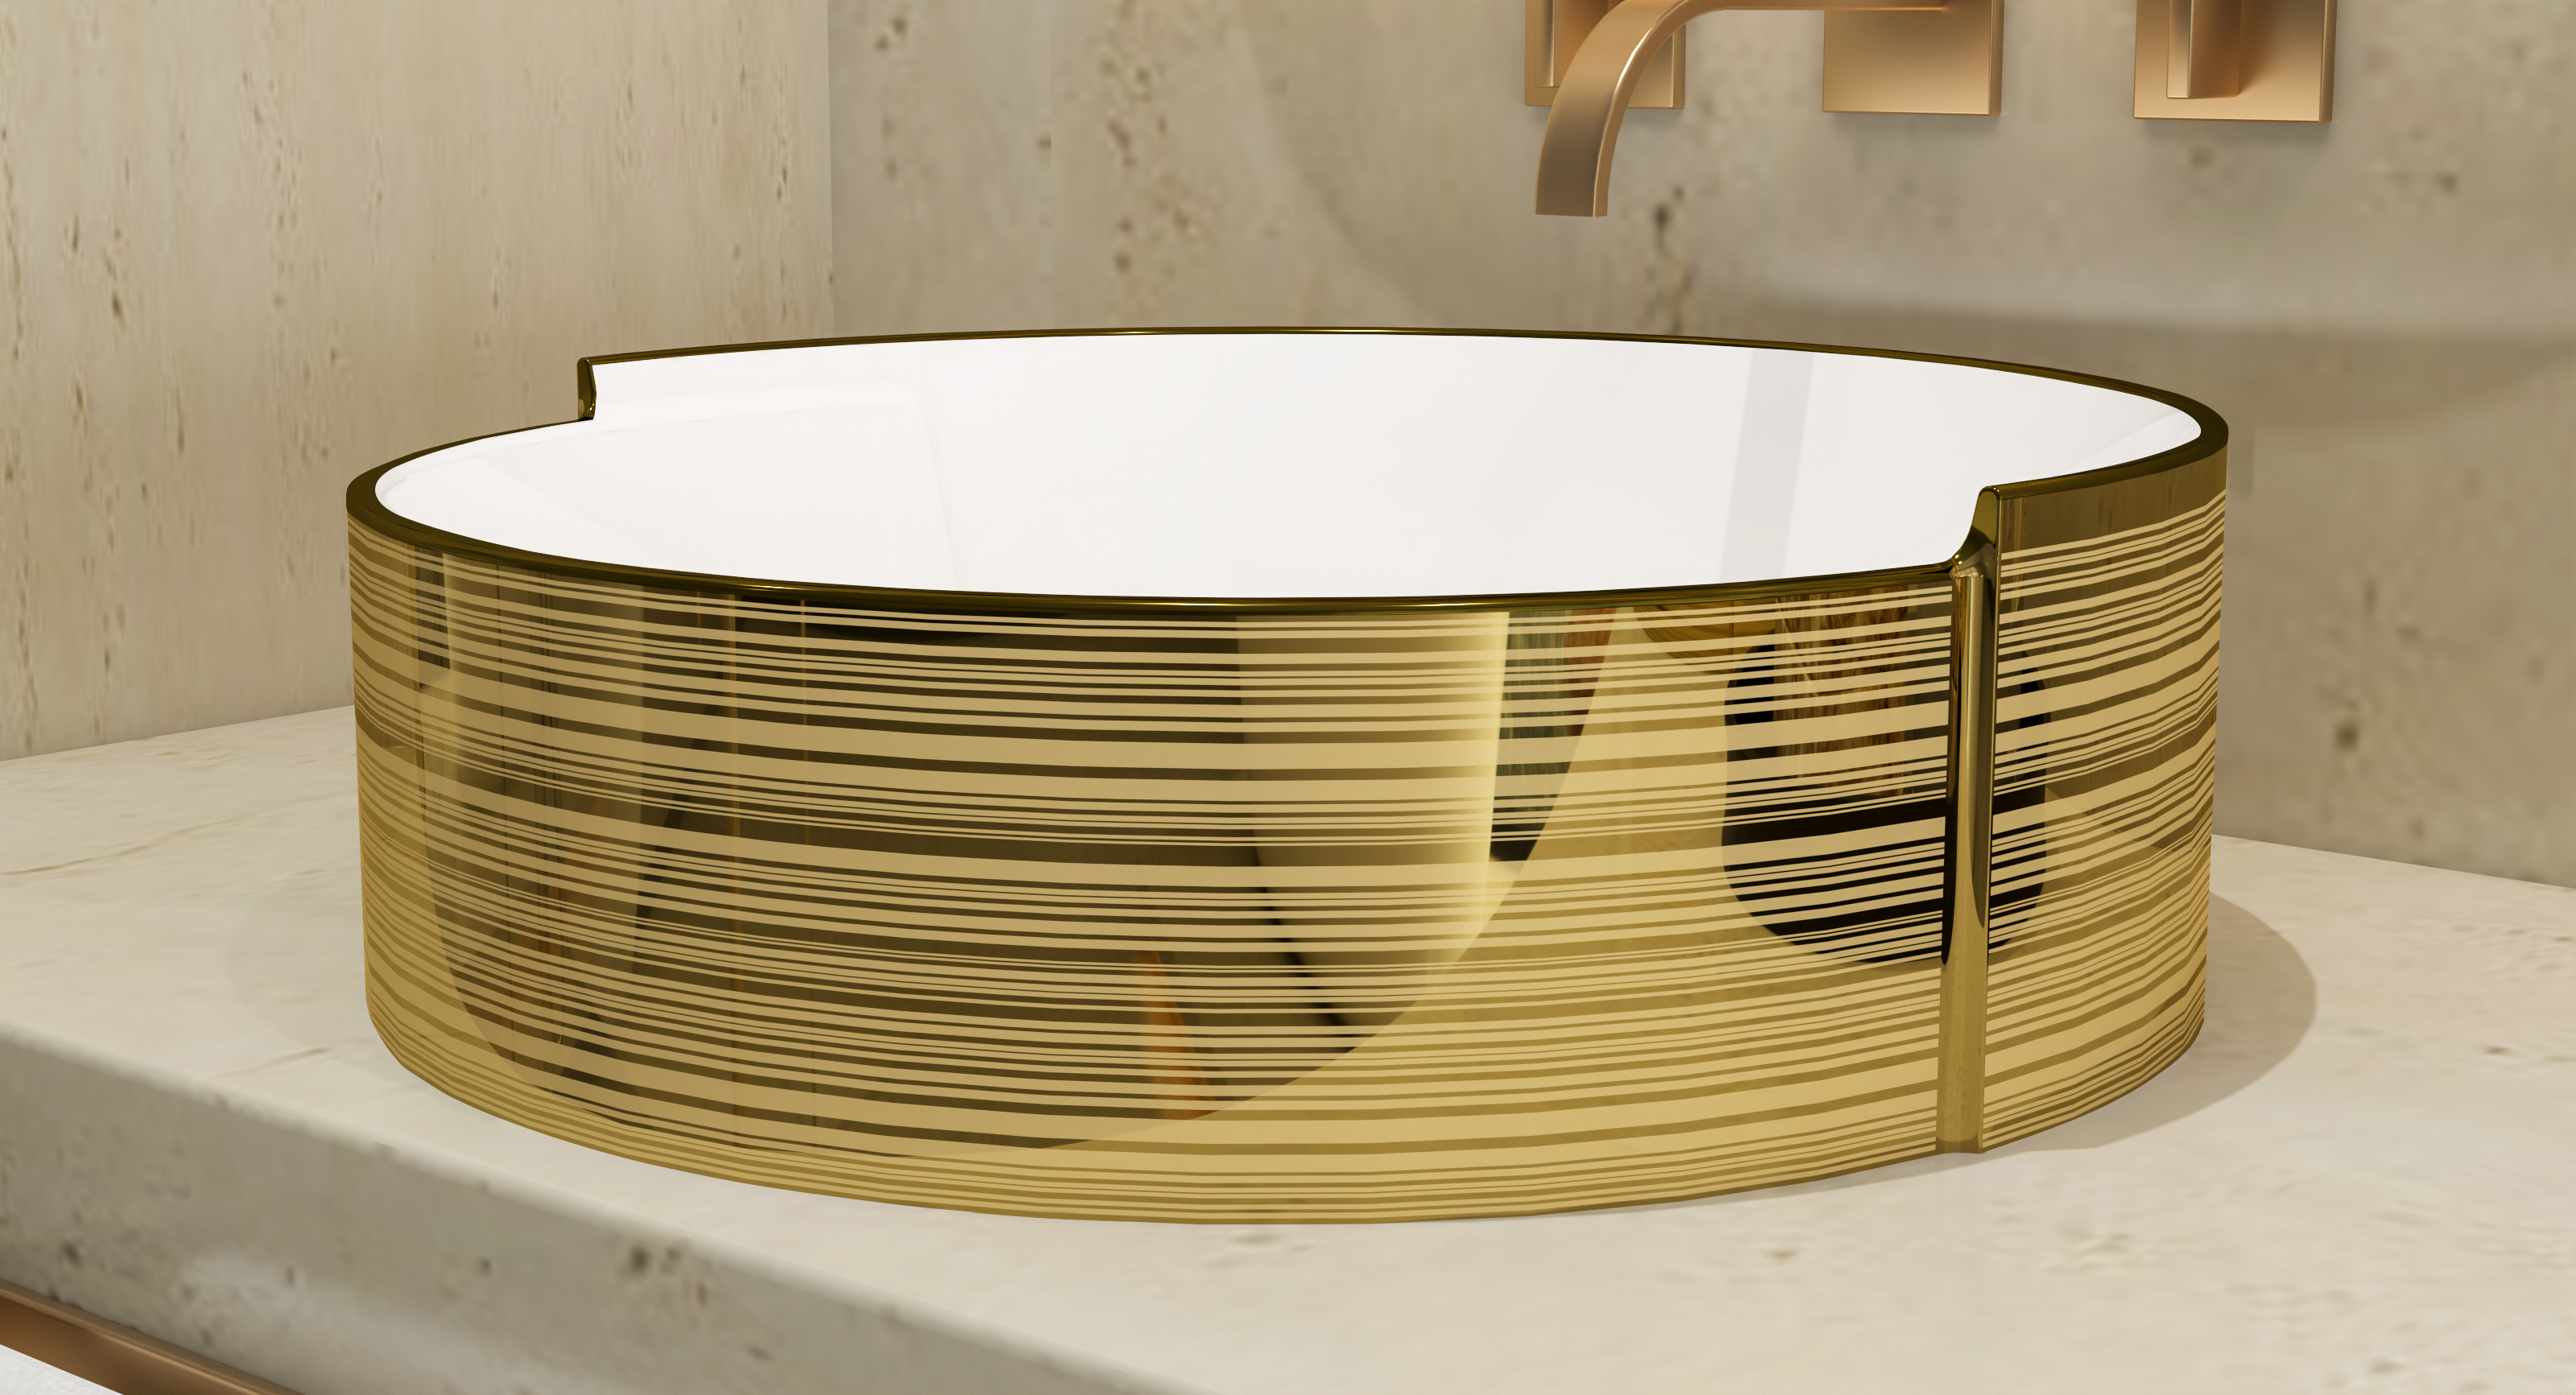 MEJE 16.75 Inch LUXURY GOLD Stripes Round Art Basin, Above Counter Bathroom Vessel Sink, Porcelain Ceramic Countertop Sink(Include pop up drain)